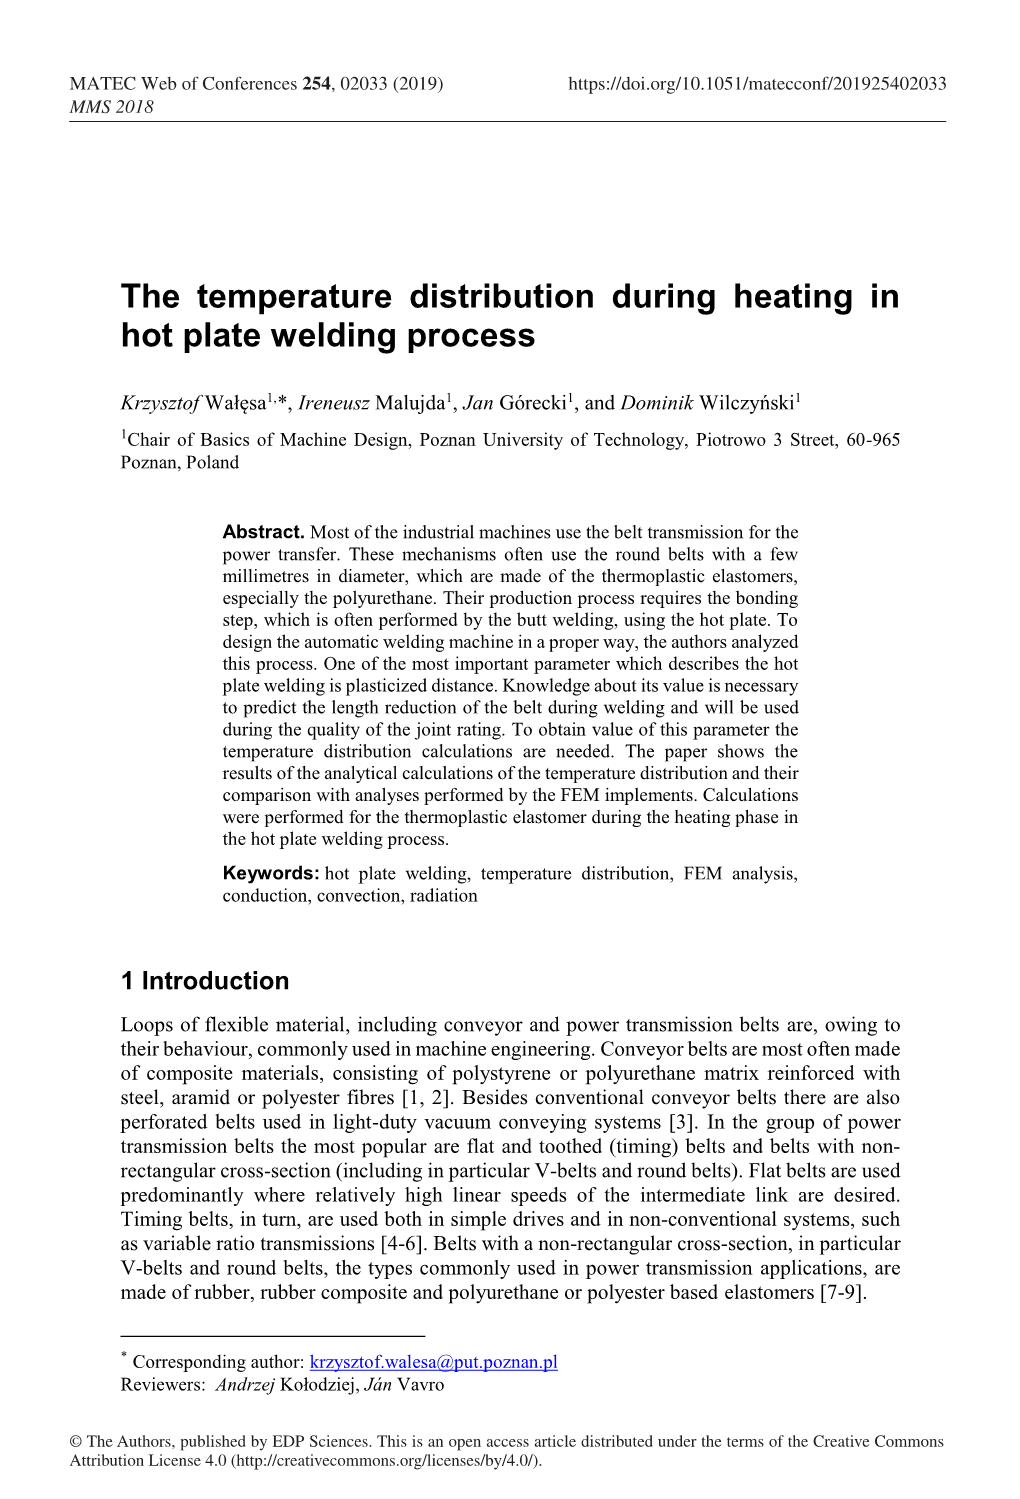 The Temperature Distribution During Heating in Hot Plate Welding Process